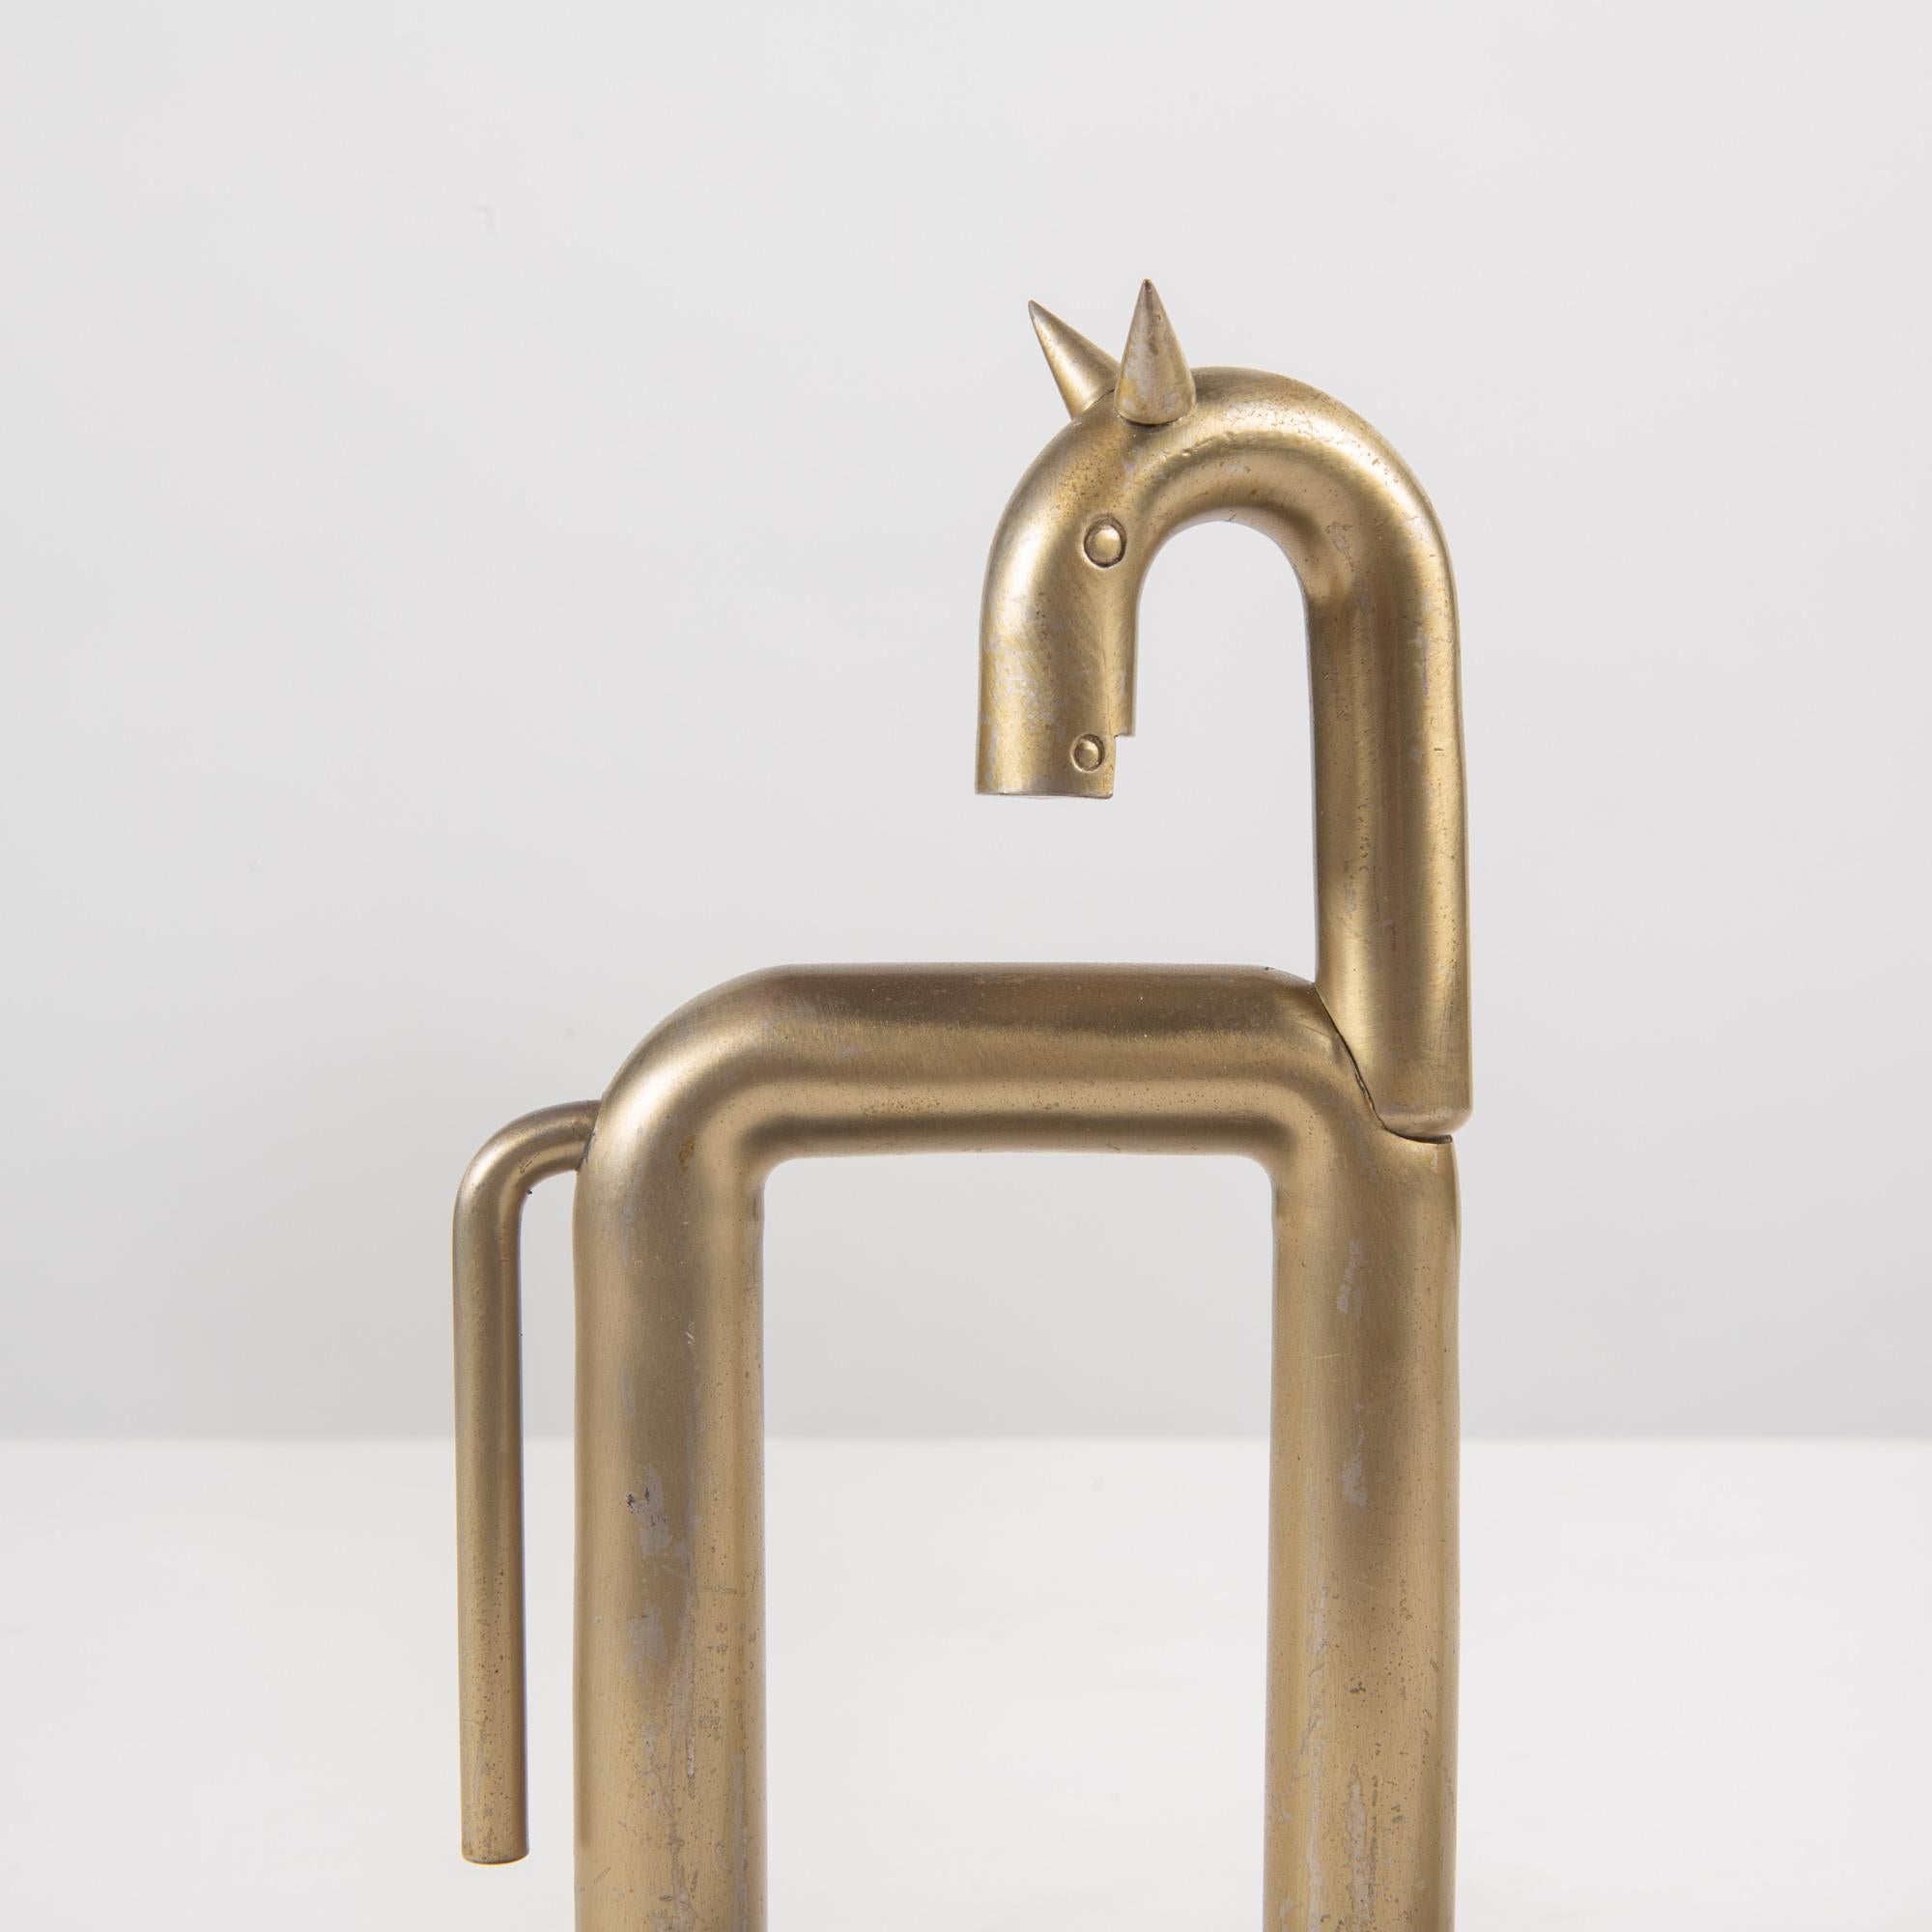 Mid-20th Century Pair of Stainless Steel Horse Bookends by Walter von Nessen for Chase USA